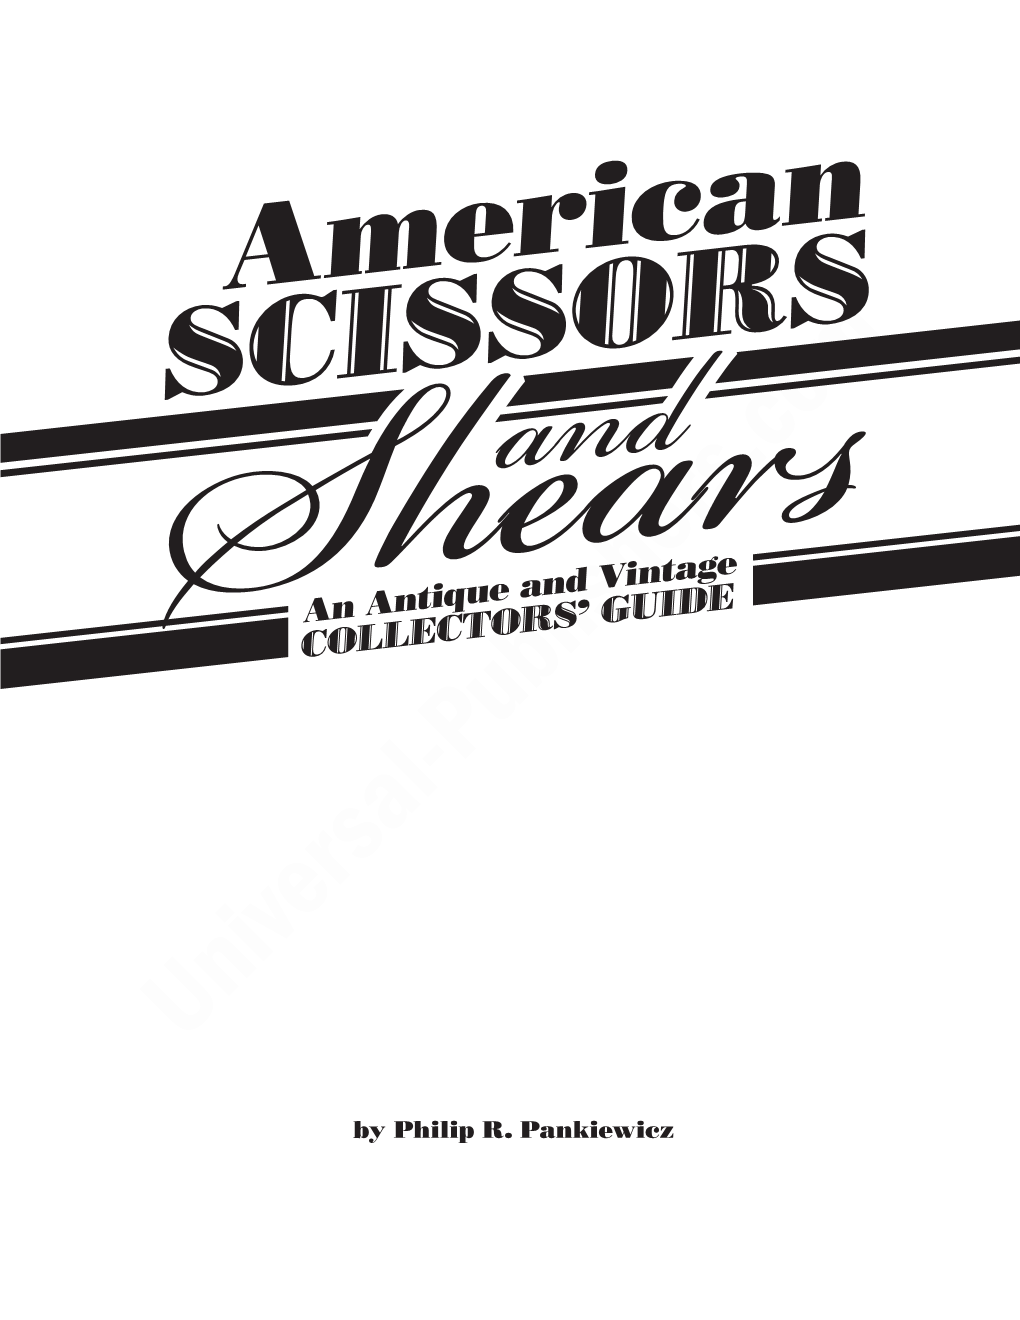 American Scissors and Shears: an Antique and Vintage Collectors' Guide